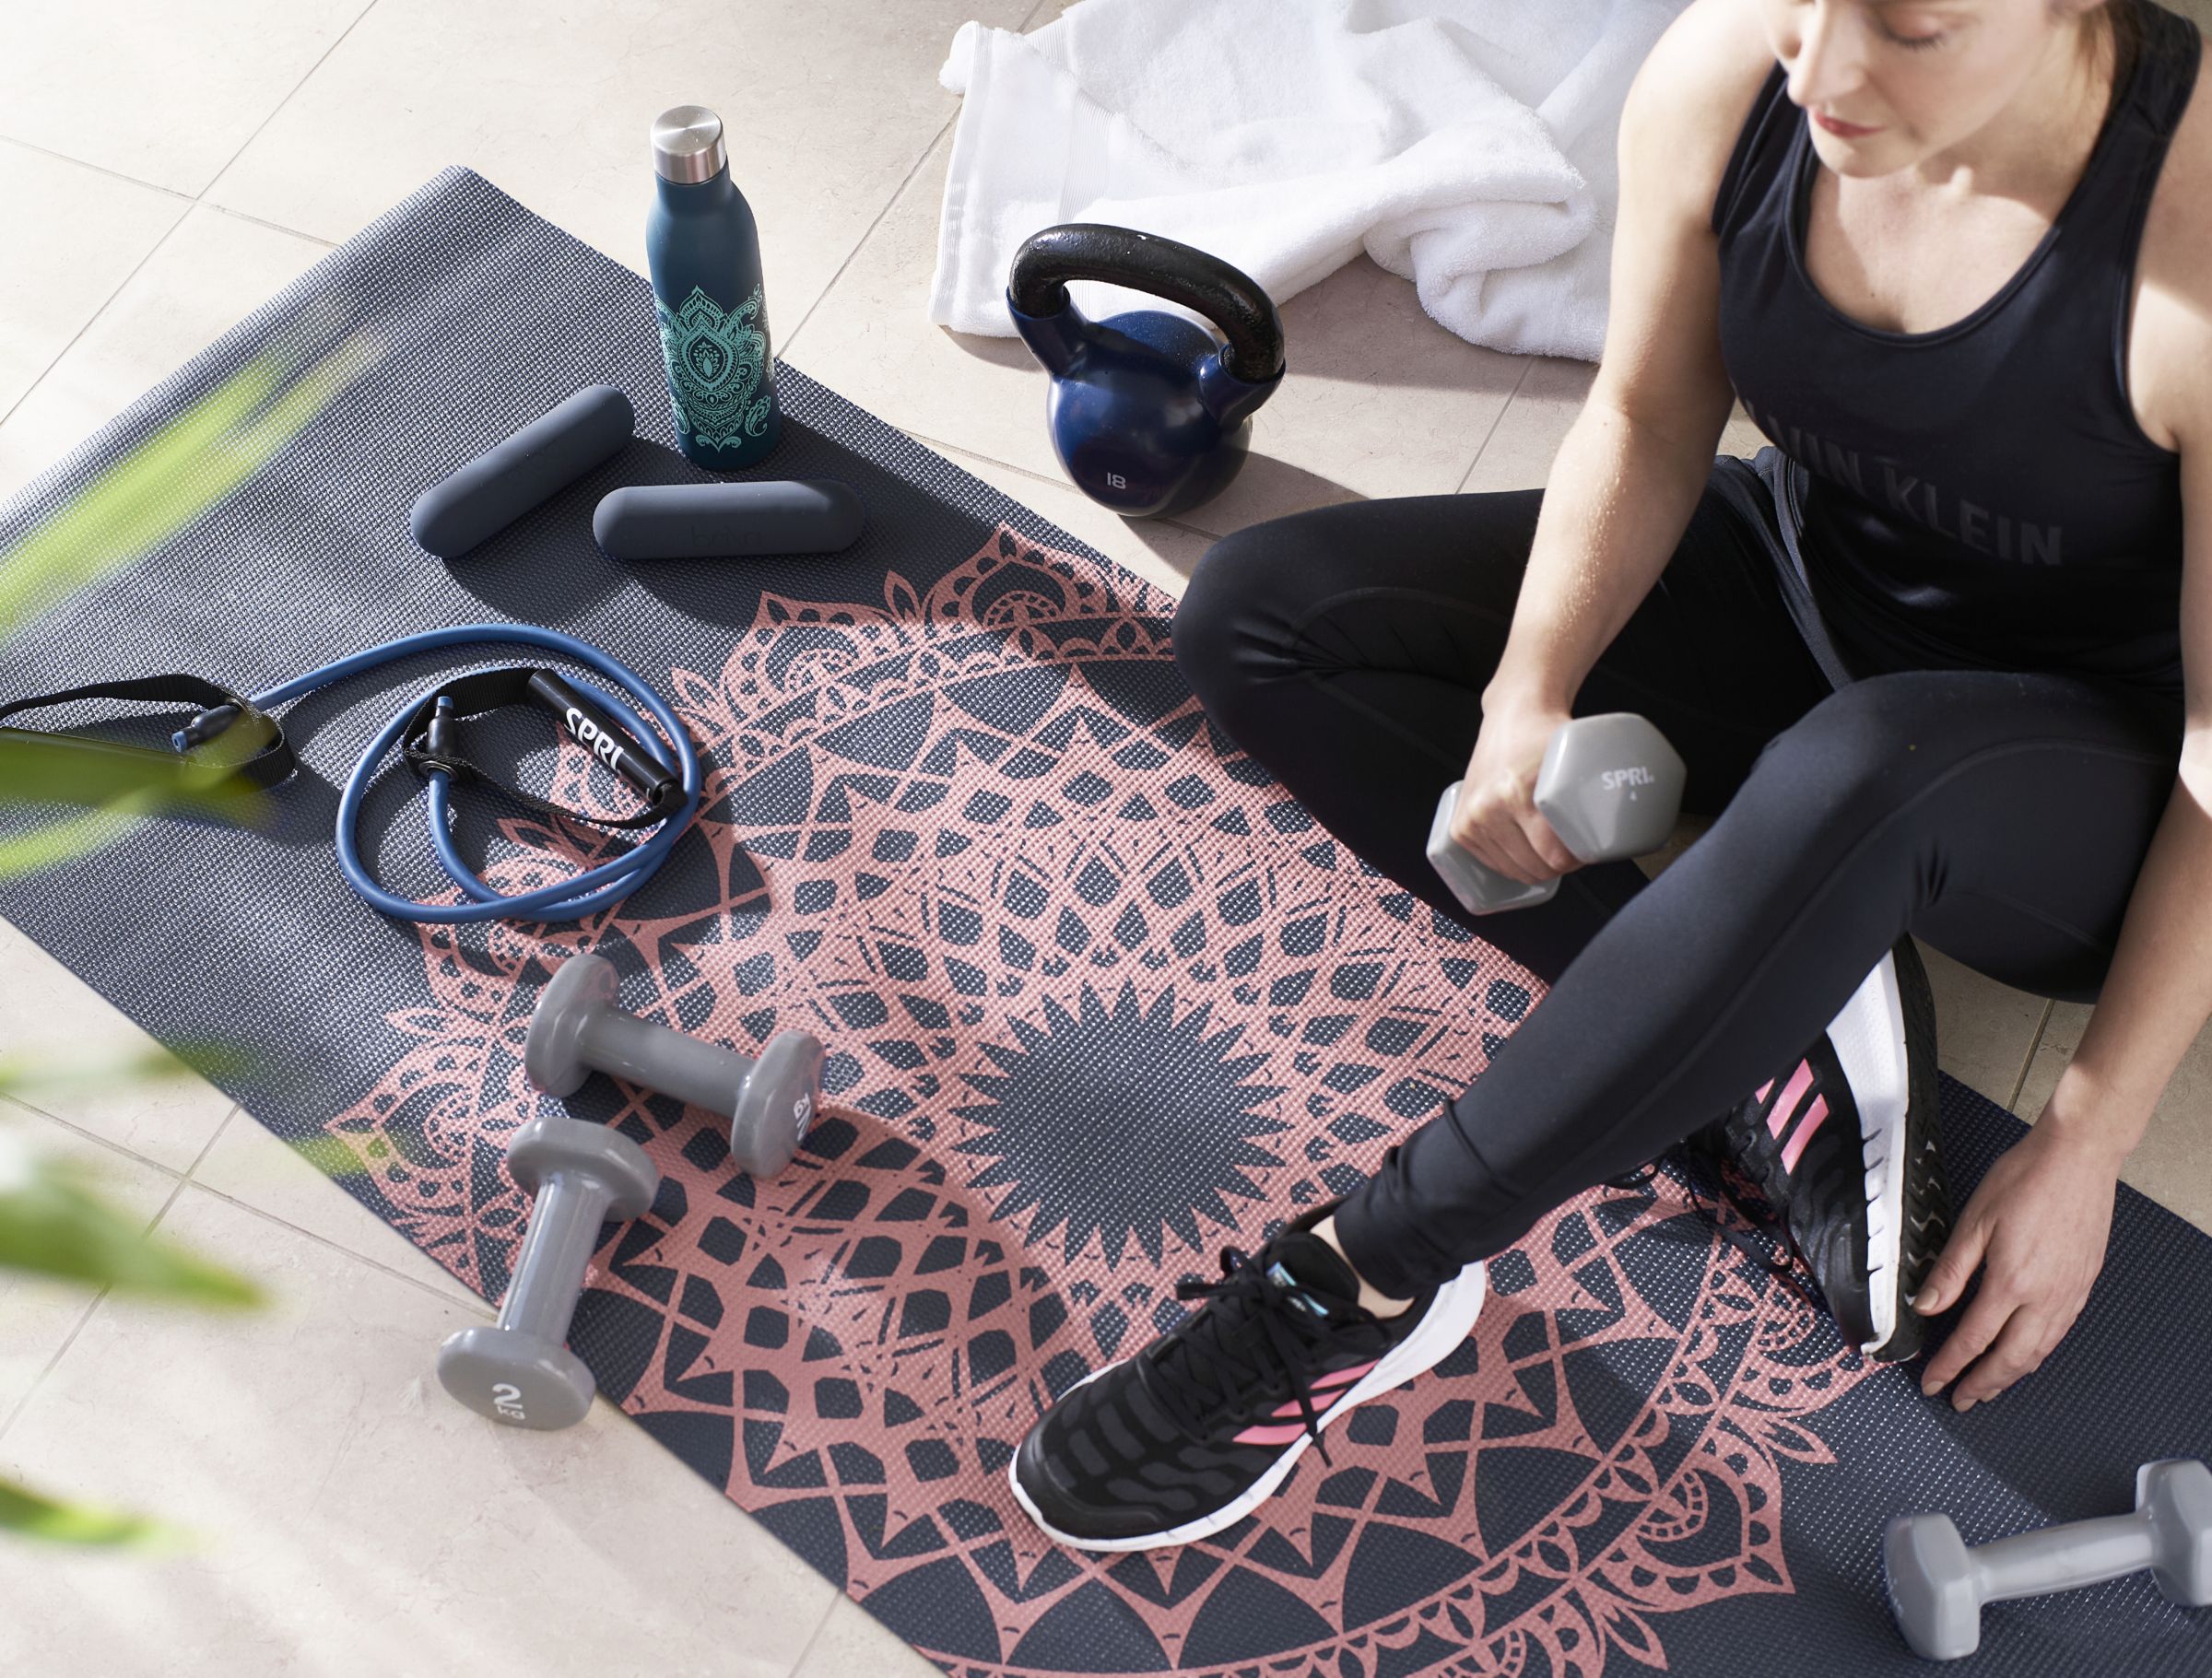 The 10 wellness trends to know about in 2021